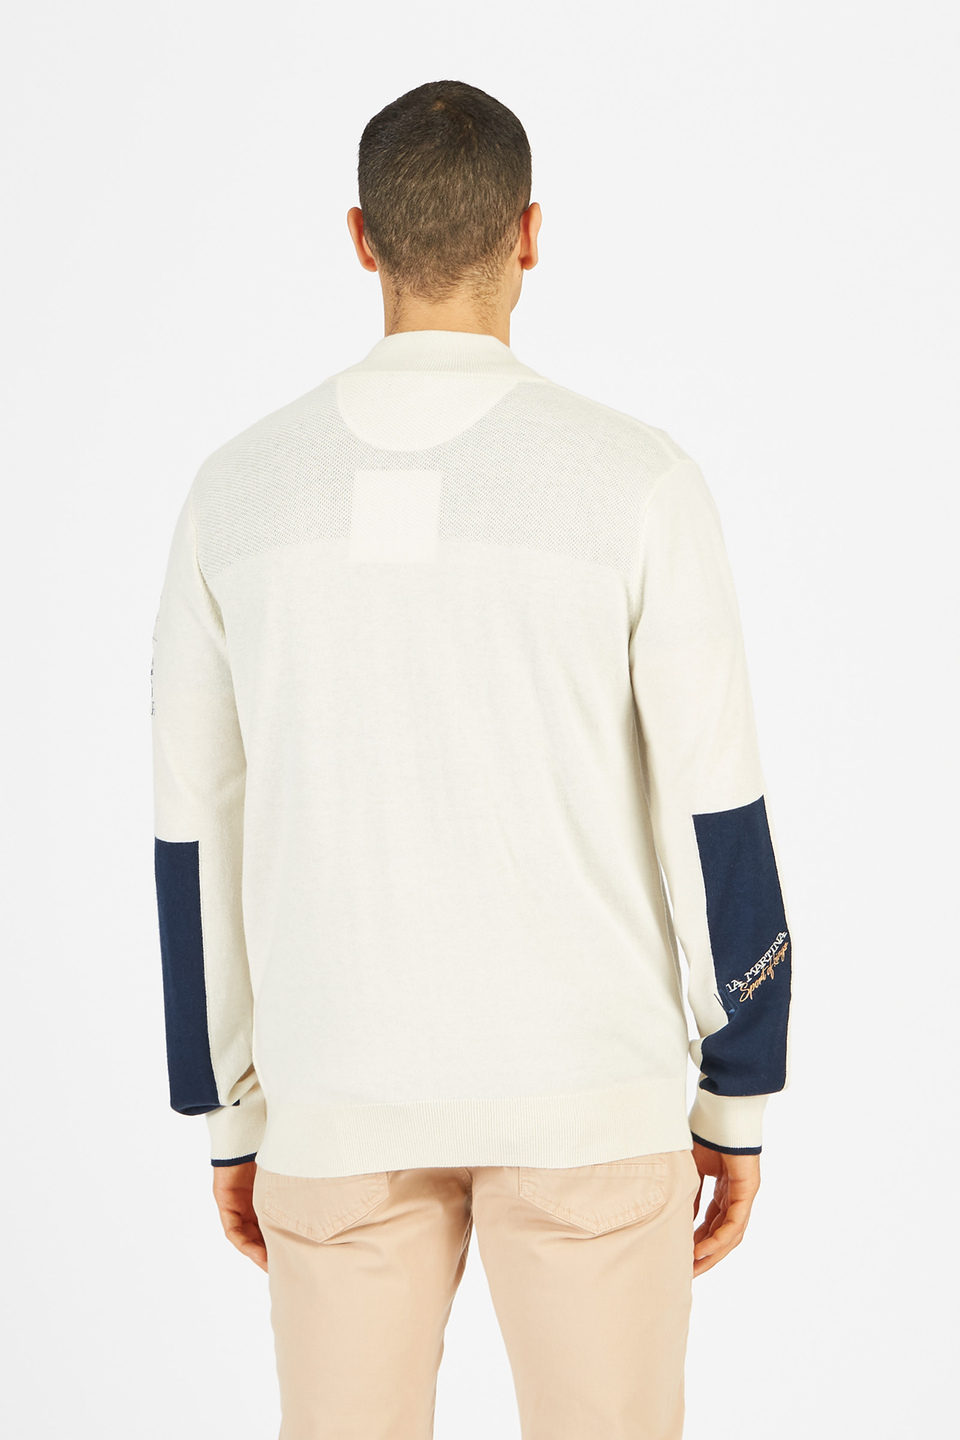 Men’s knitted sweater with long sleeves in cotton wool blend with regular fit zip | La Martina - Official Online Shop